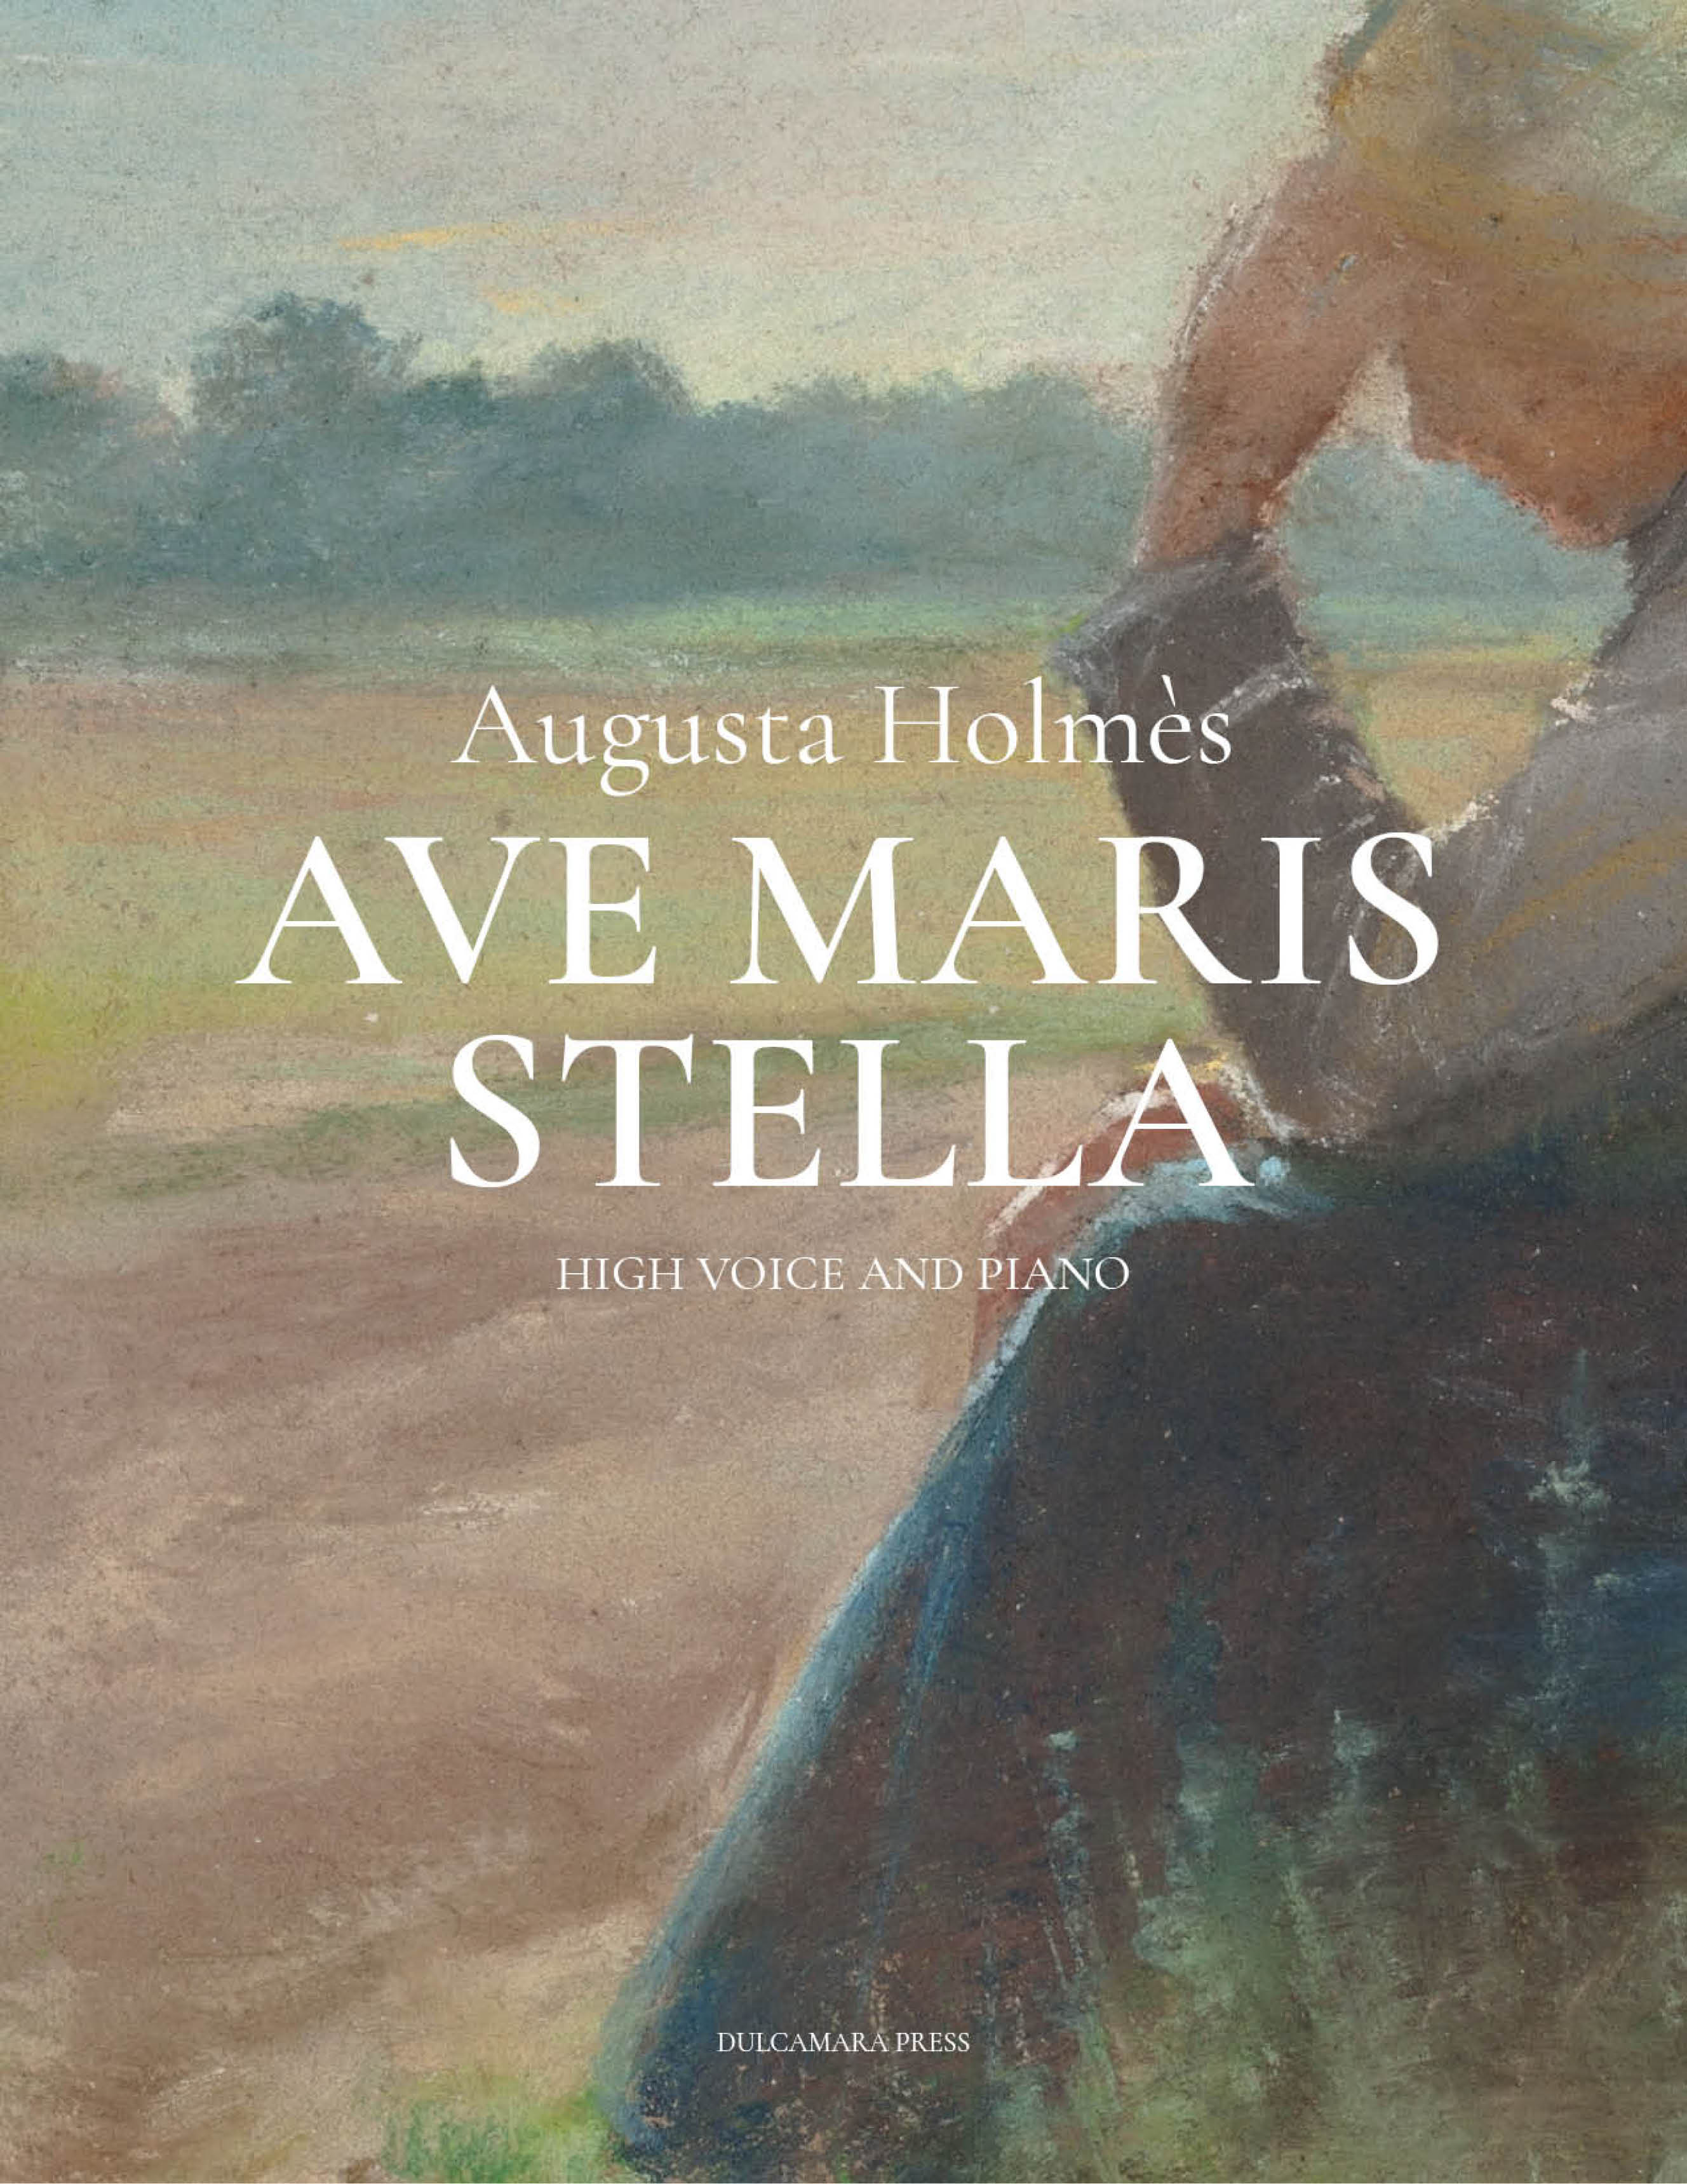 Ave Maris Stella for high voice and piano by Augusta Holmès